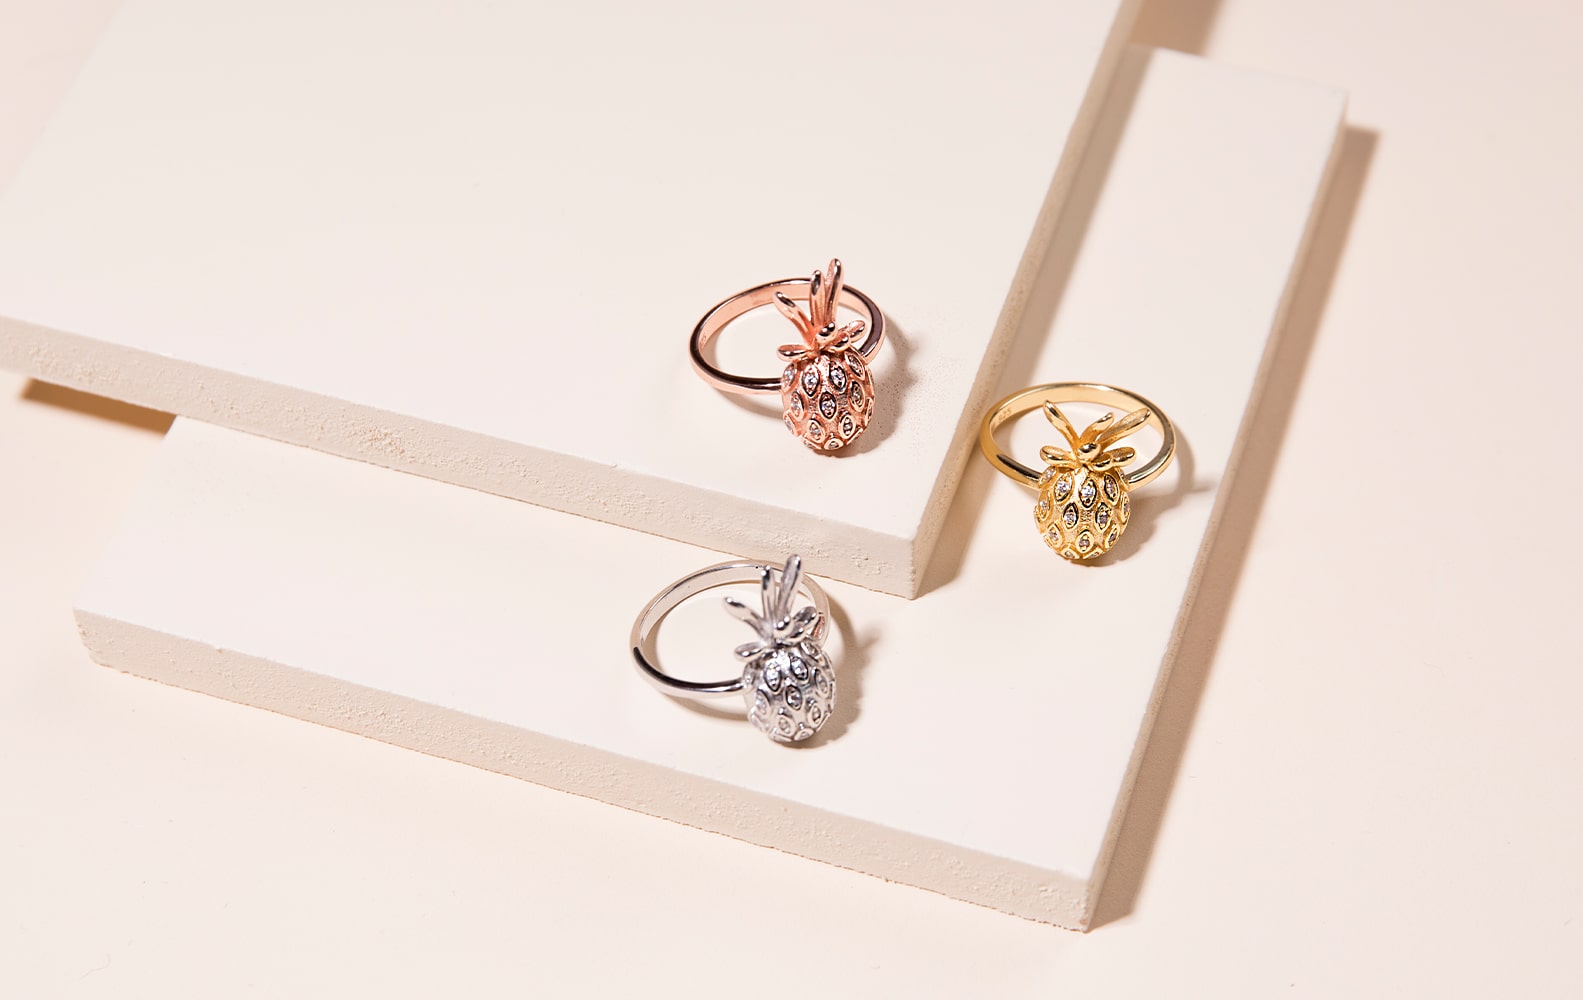 NOGU Summer Pineapple Dainty Rings (Rose Gold, Silver, Gold Vermeil with CZ Diamonds)